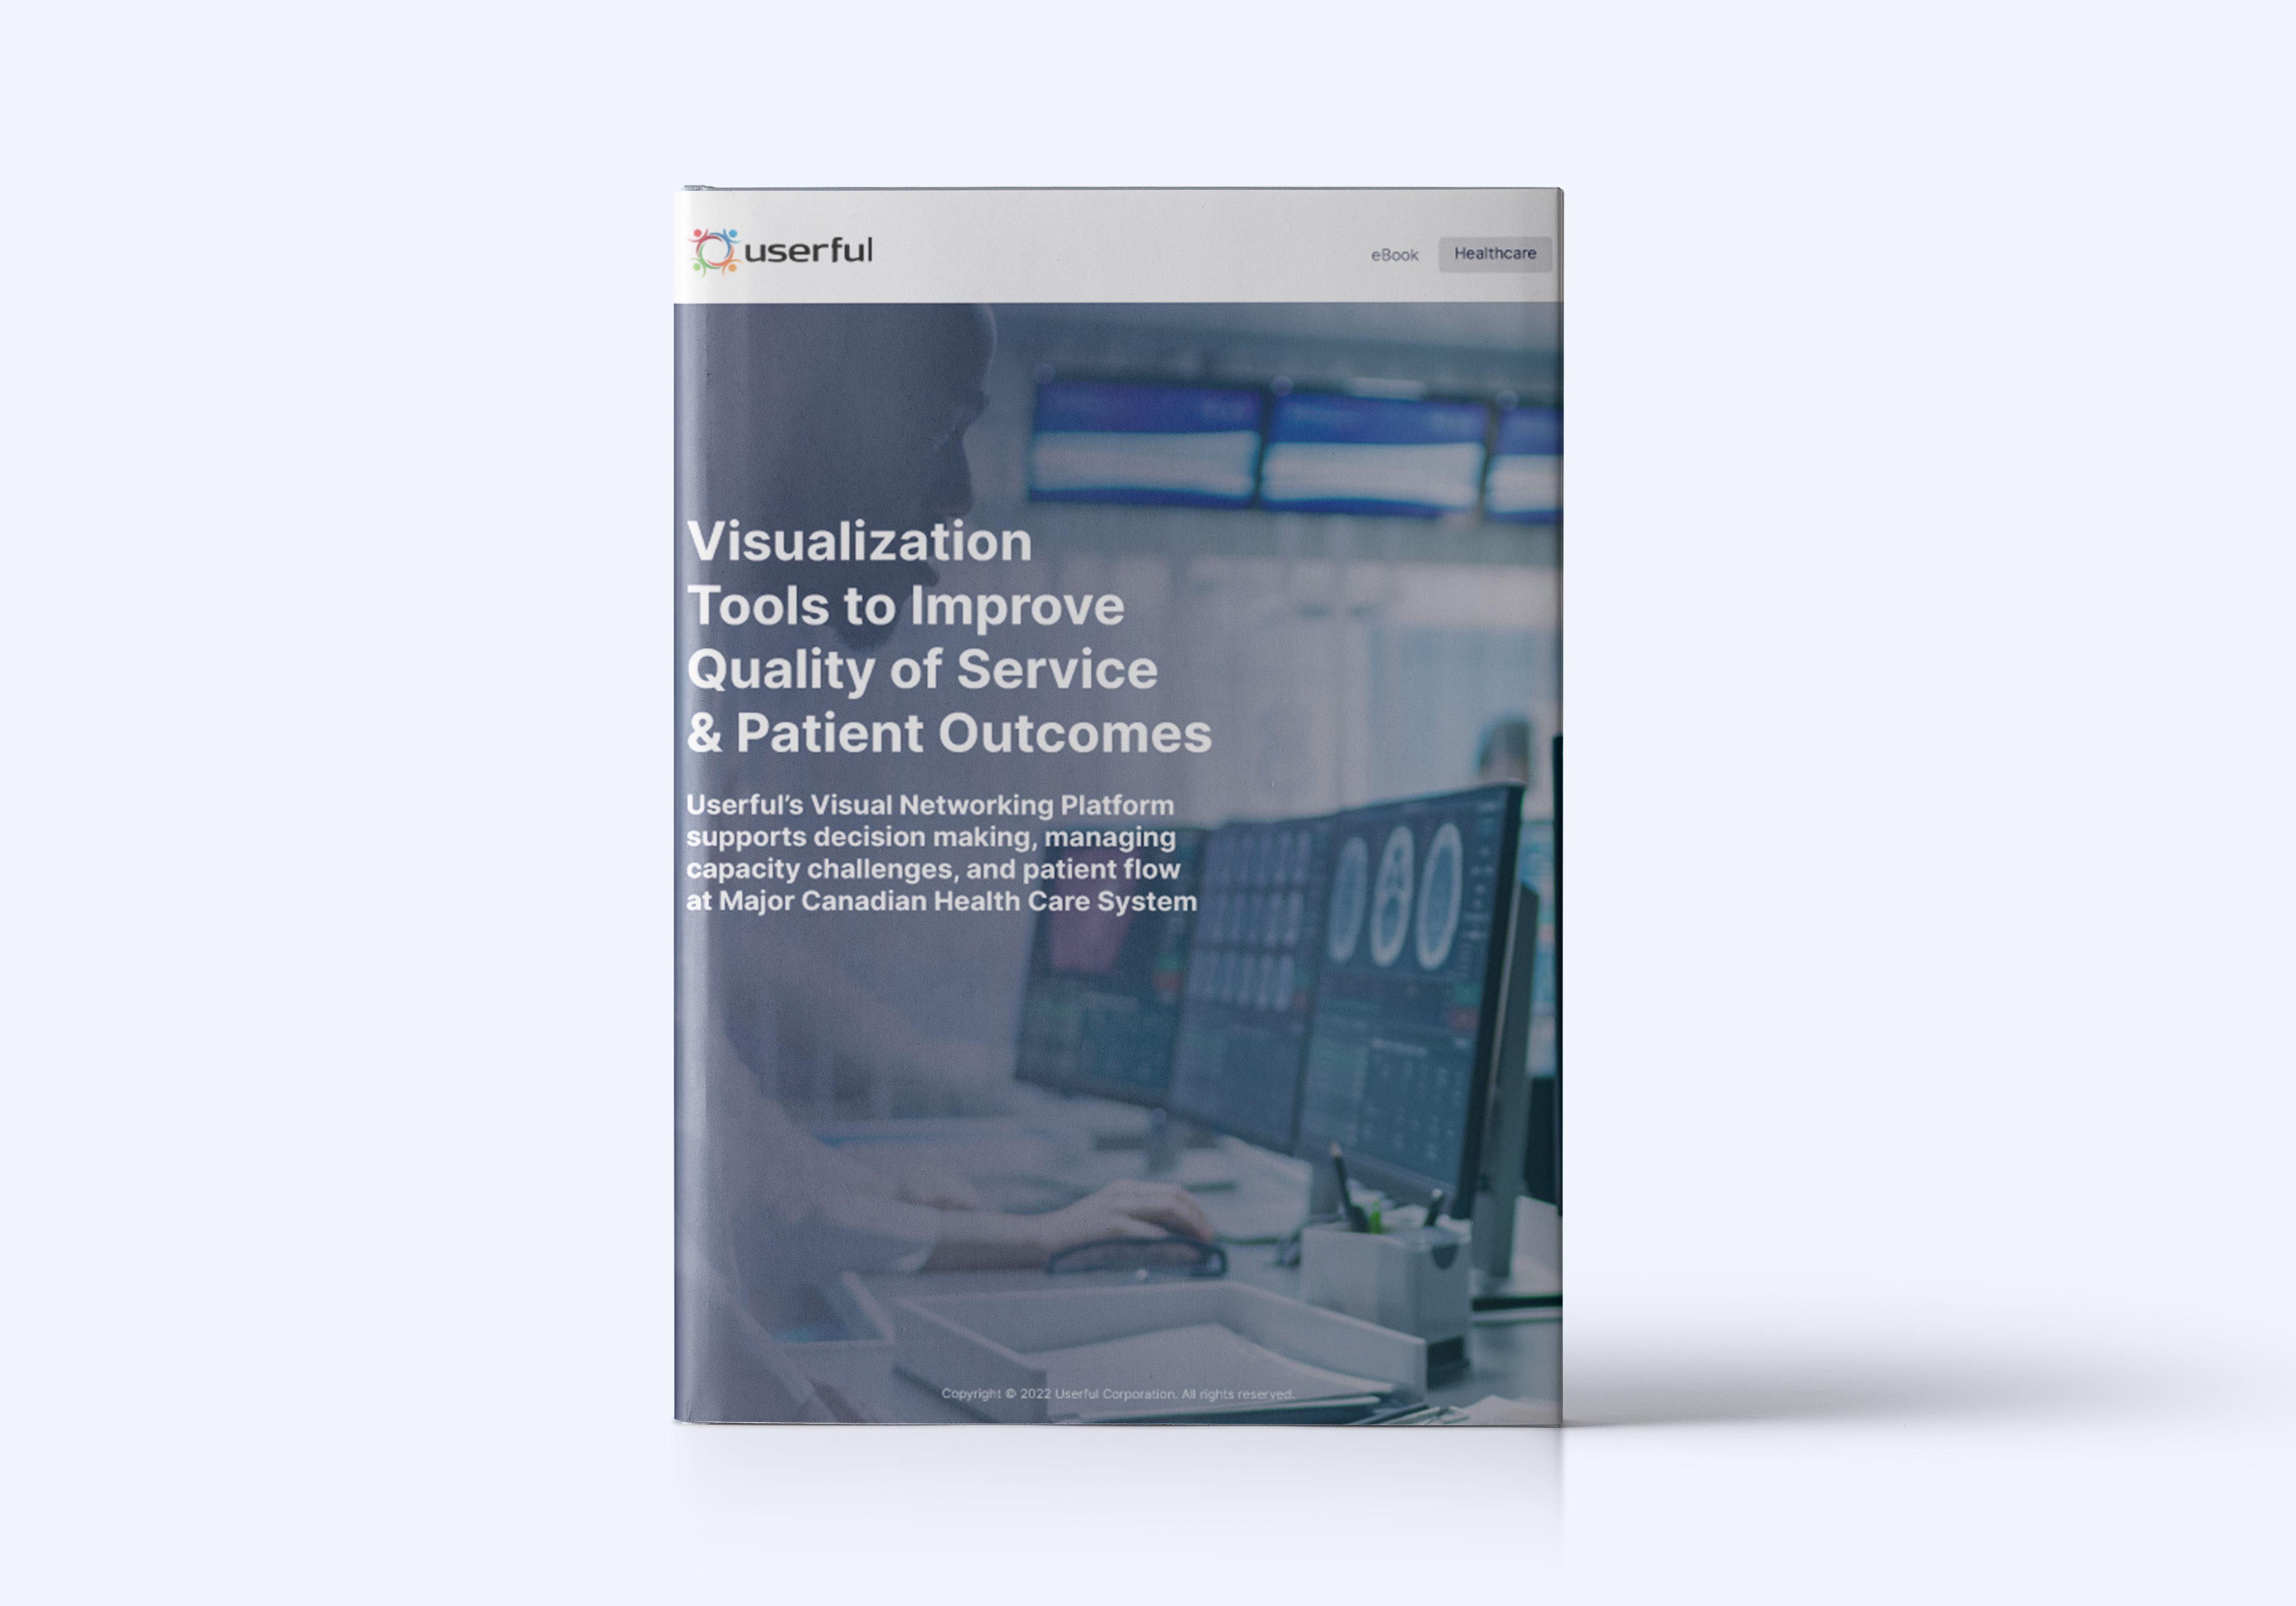 Userful's Visualization Tools to Improve Quality of Service & Patient Outcomes Ebook